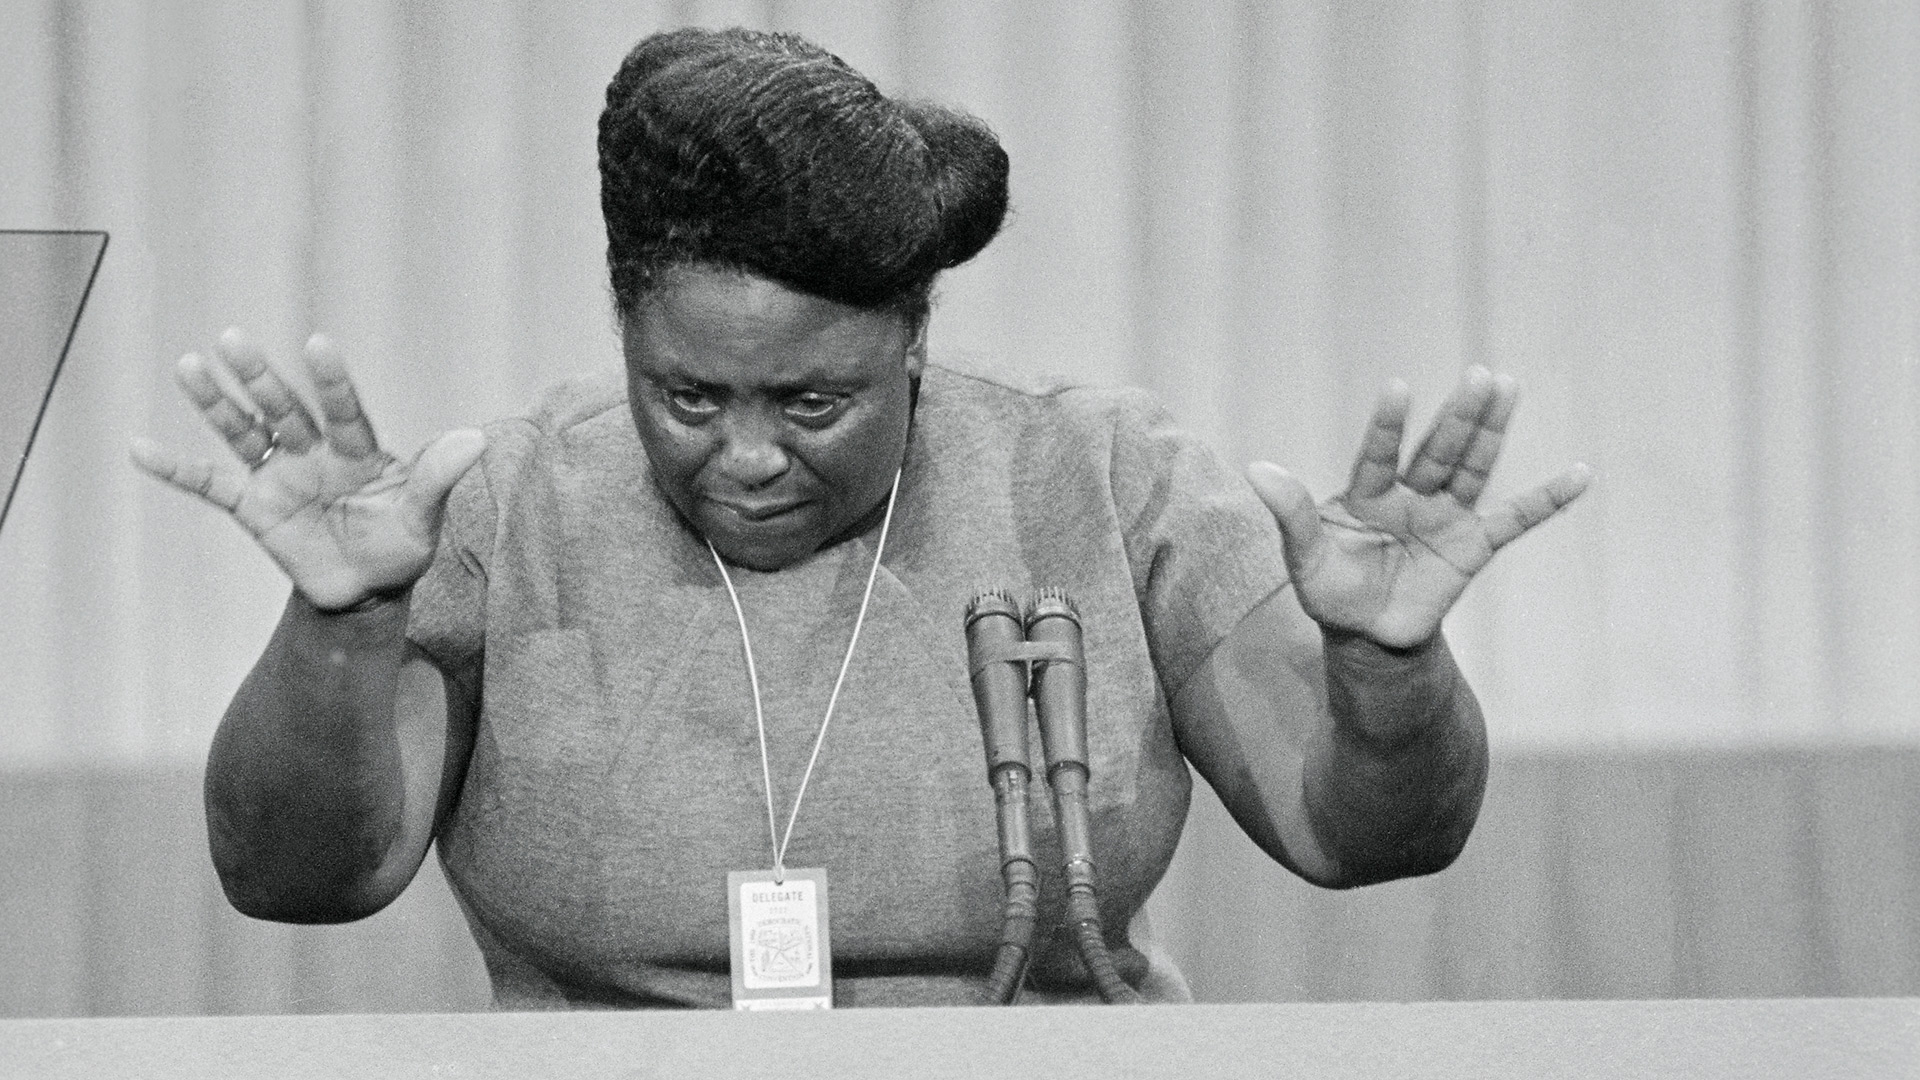 August 22, 1964: Fannie Lou Hamer Spoke Out For Civil Rights